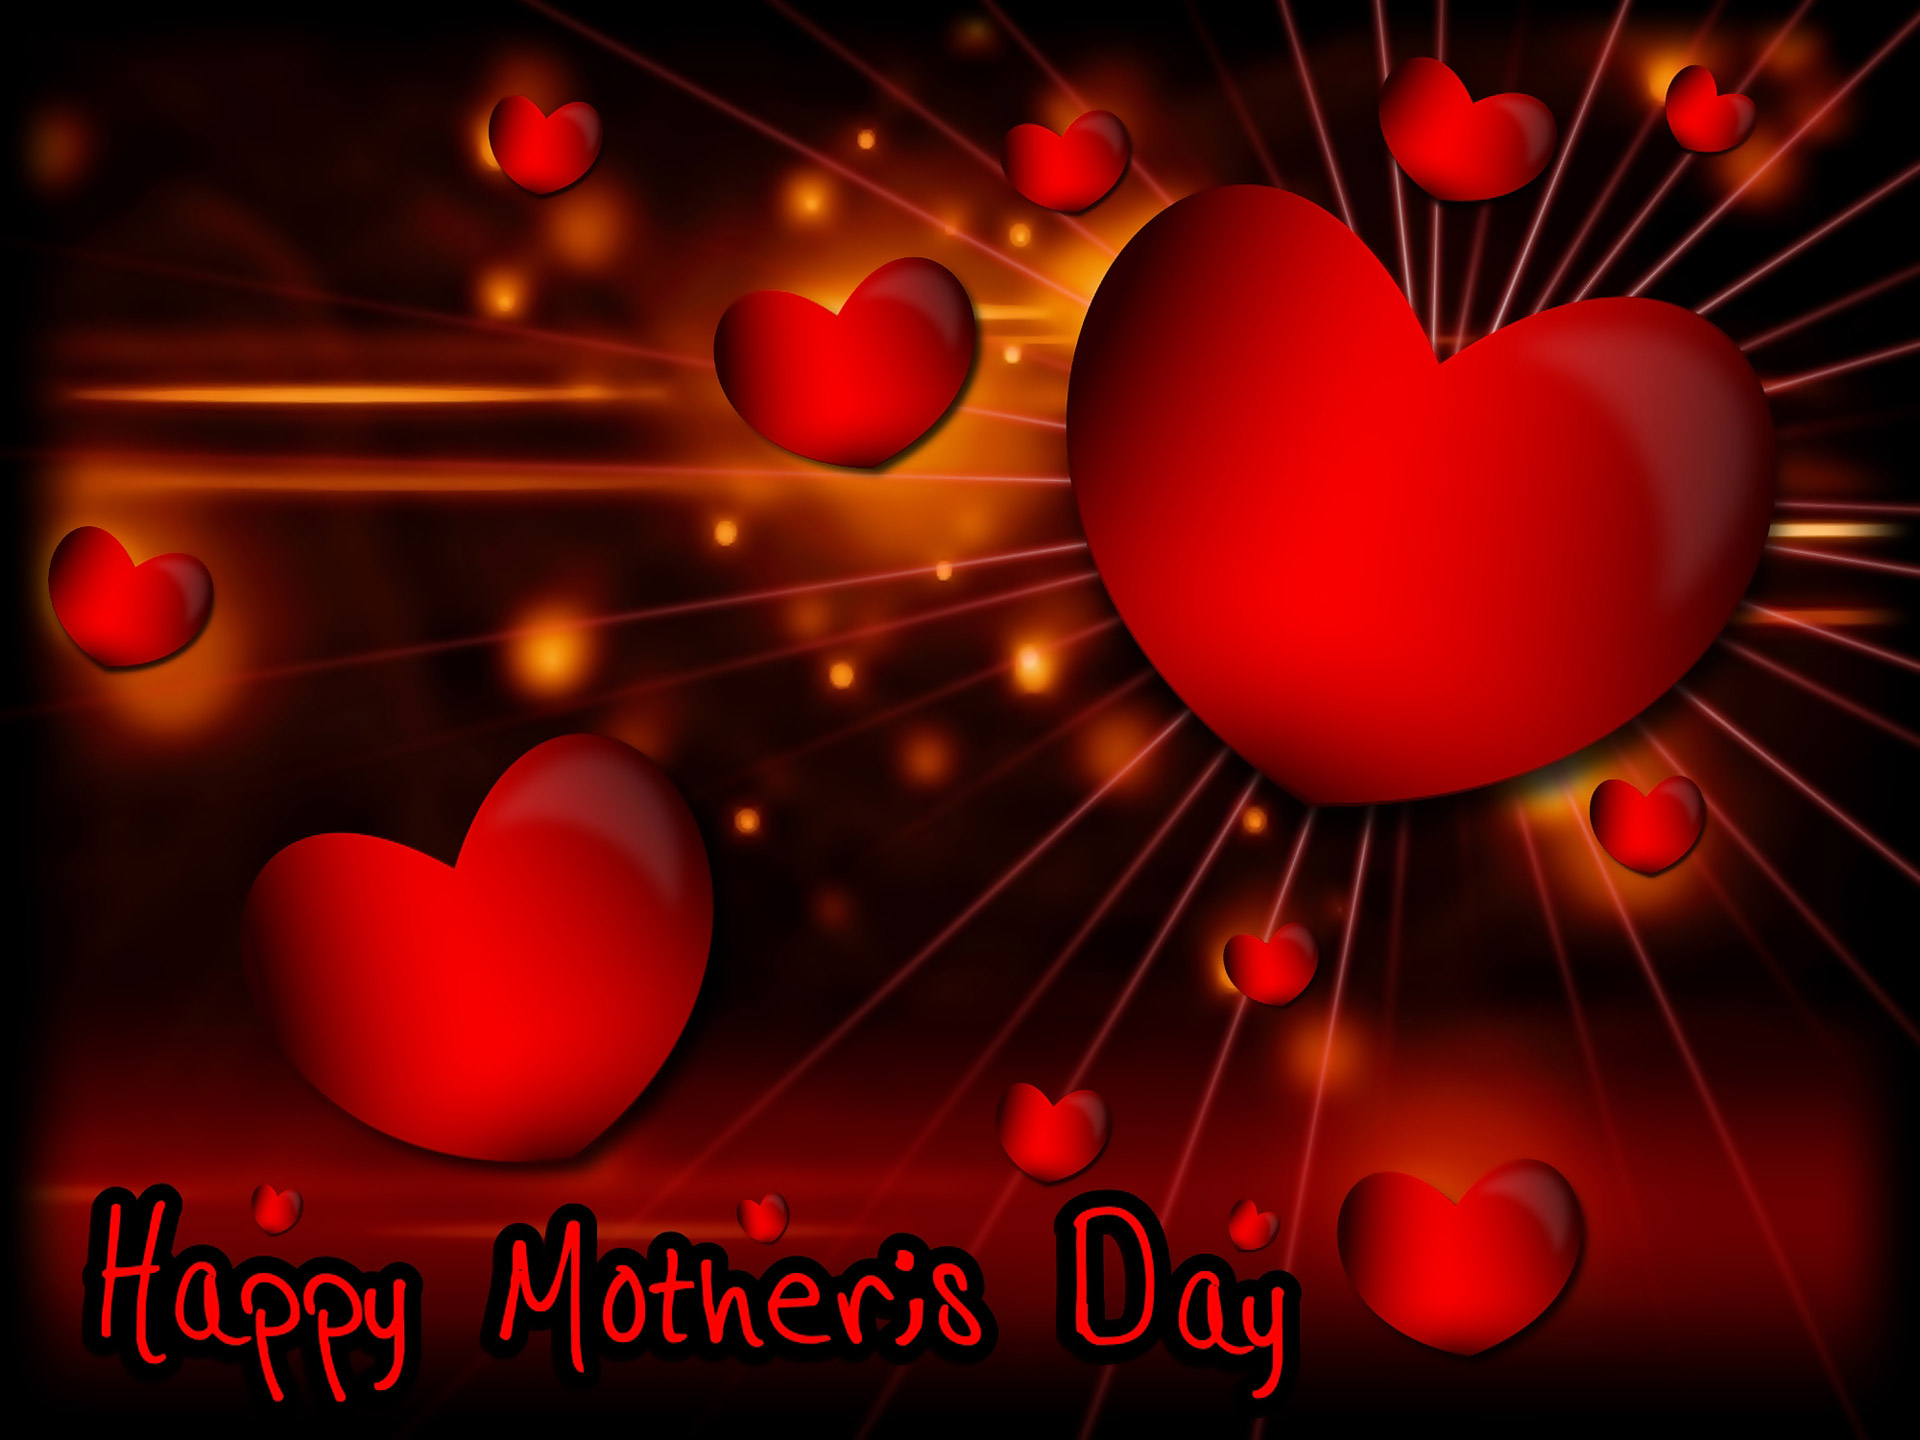 background sauermaul mother's day free photo